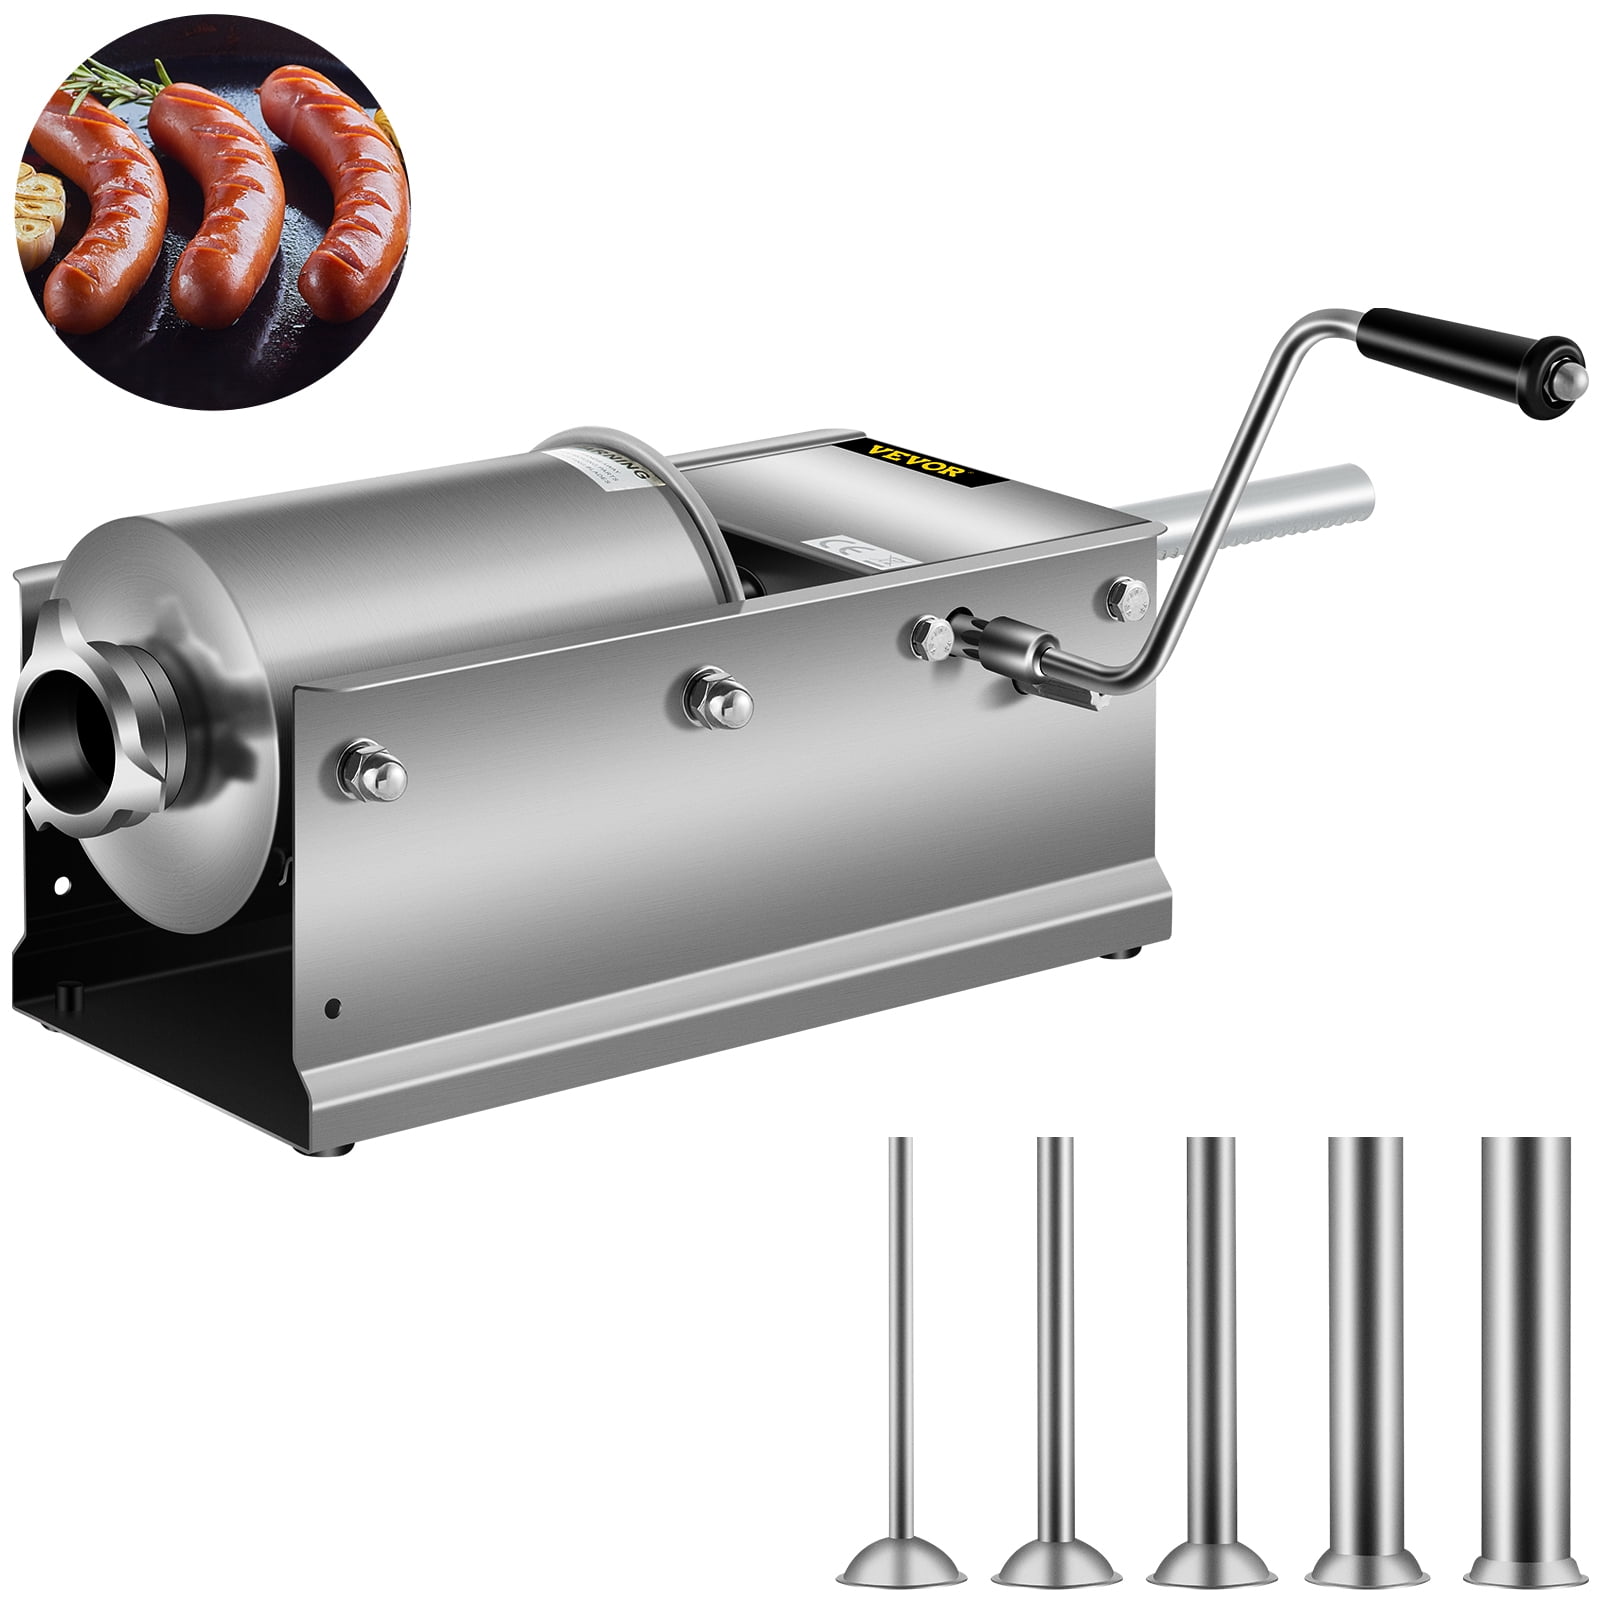 3 Pieces Stainless Steel Sausage Making Kit Deer Processing Equipment 3  Sizes Sausage Stuffer Tubes for